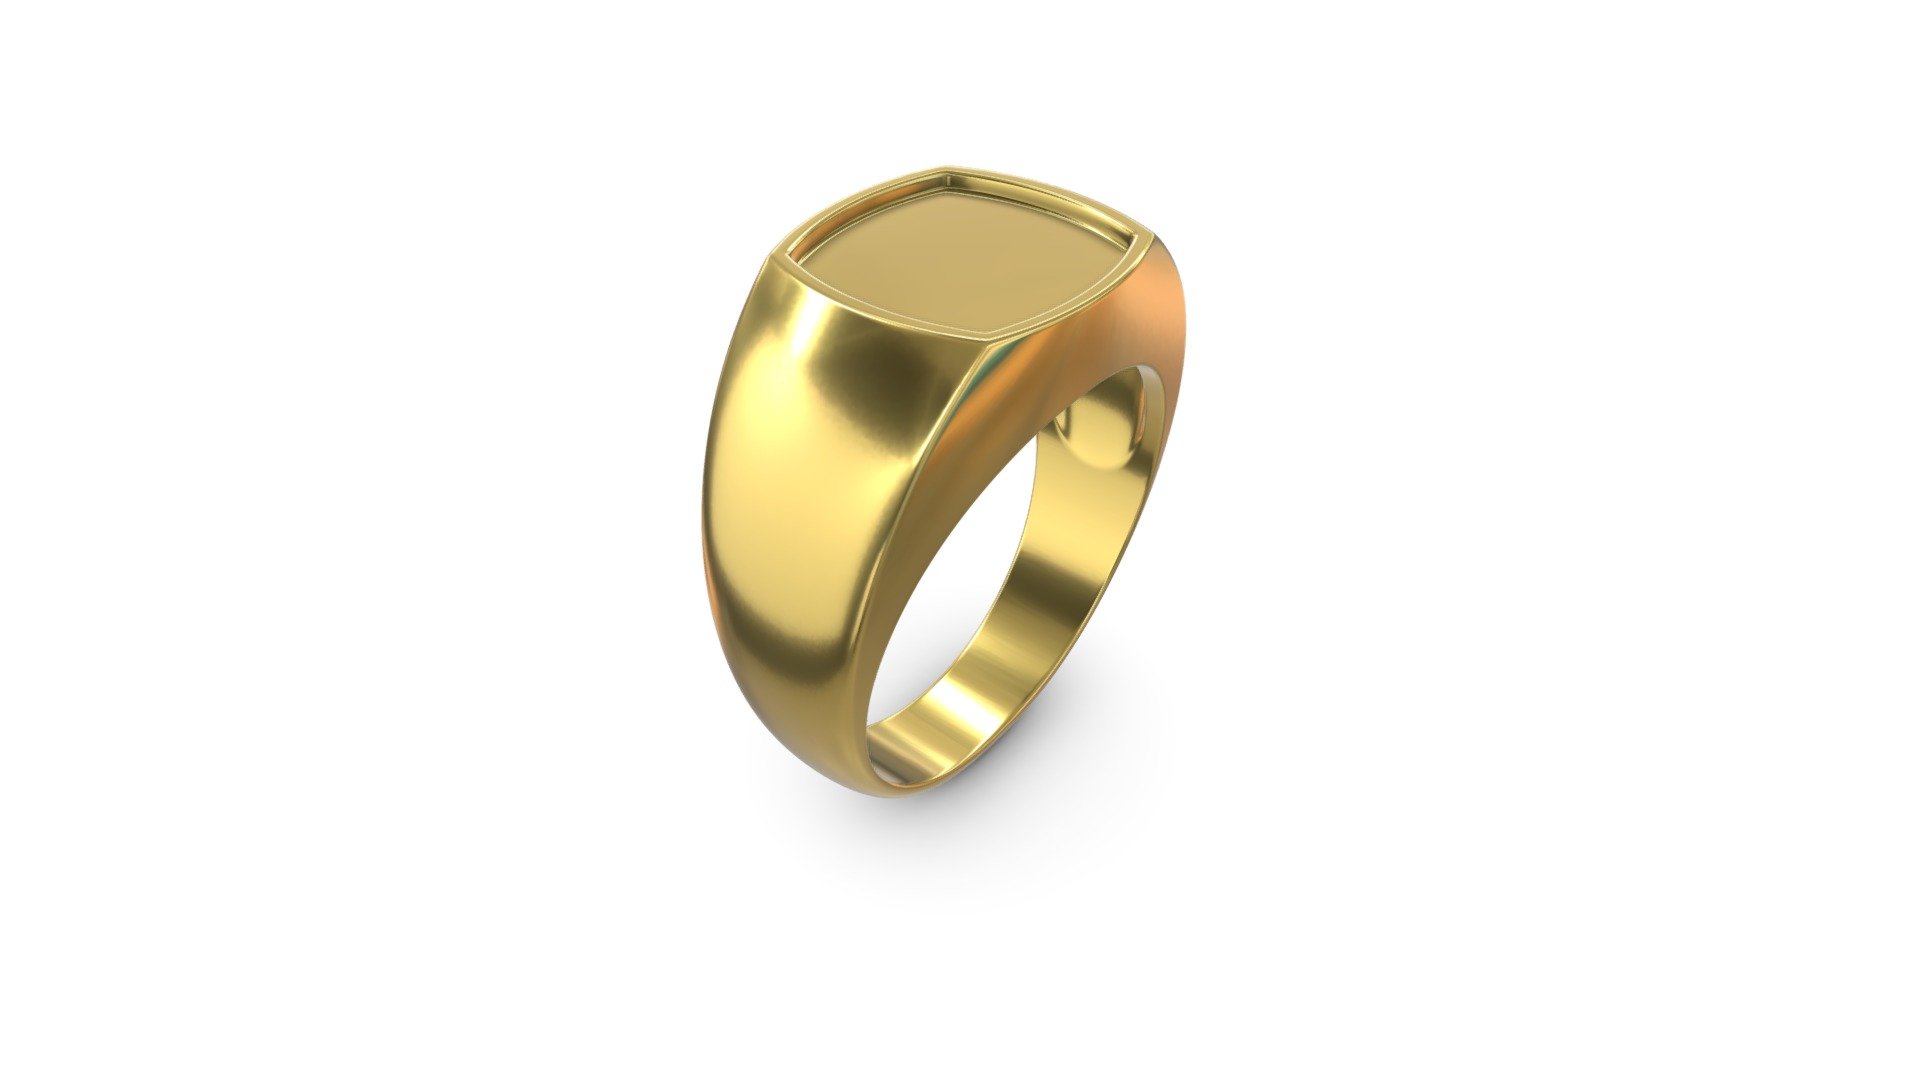 * Base Ring



Size: 

Height: 23,27 mm 

Width: 21,34 mm

Depth 10,96mm

** Inside:** 18.1mm

Thickness: 1,2mm ~ 0.9mm

Volume: 604.75 cubic millimeters

Approximate weight: 

18k Gold: 9.39g

14k Gold: 8.34g  

Silver 950: 6.16g
 - Base Ring - Buy Royalty Free 3D model by Busanello 3d model